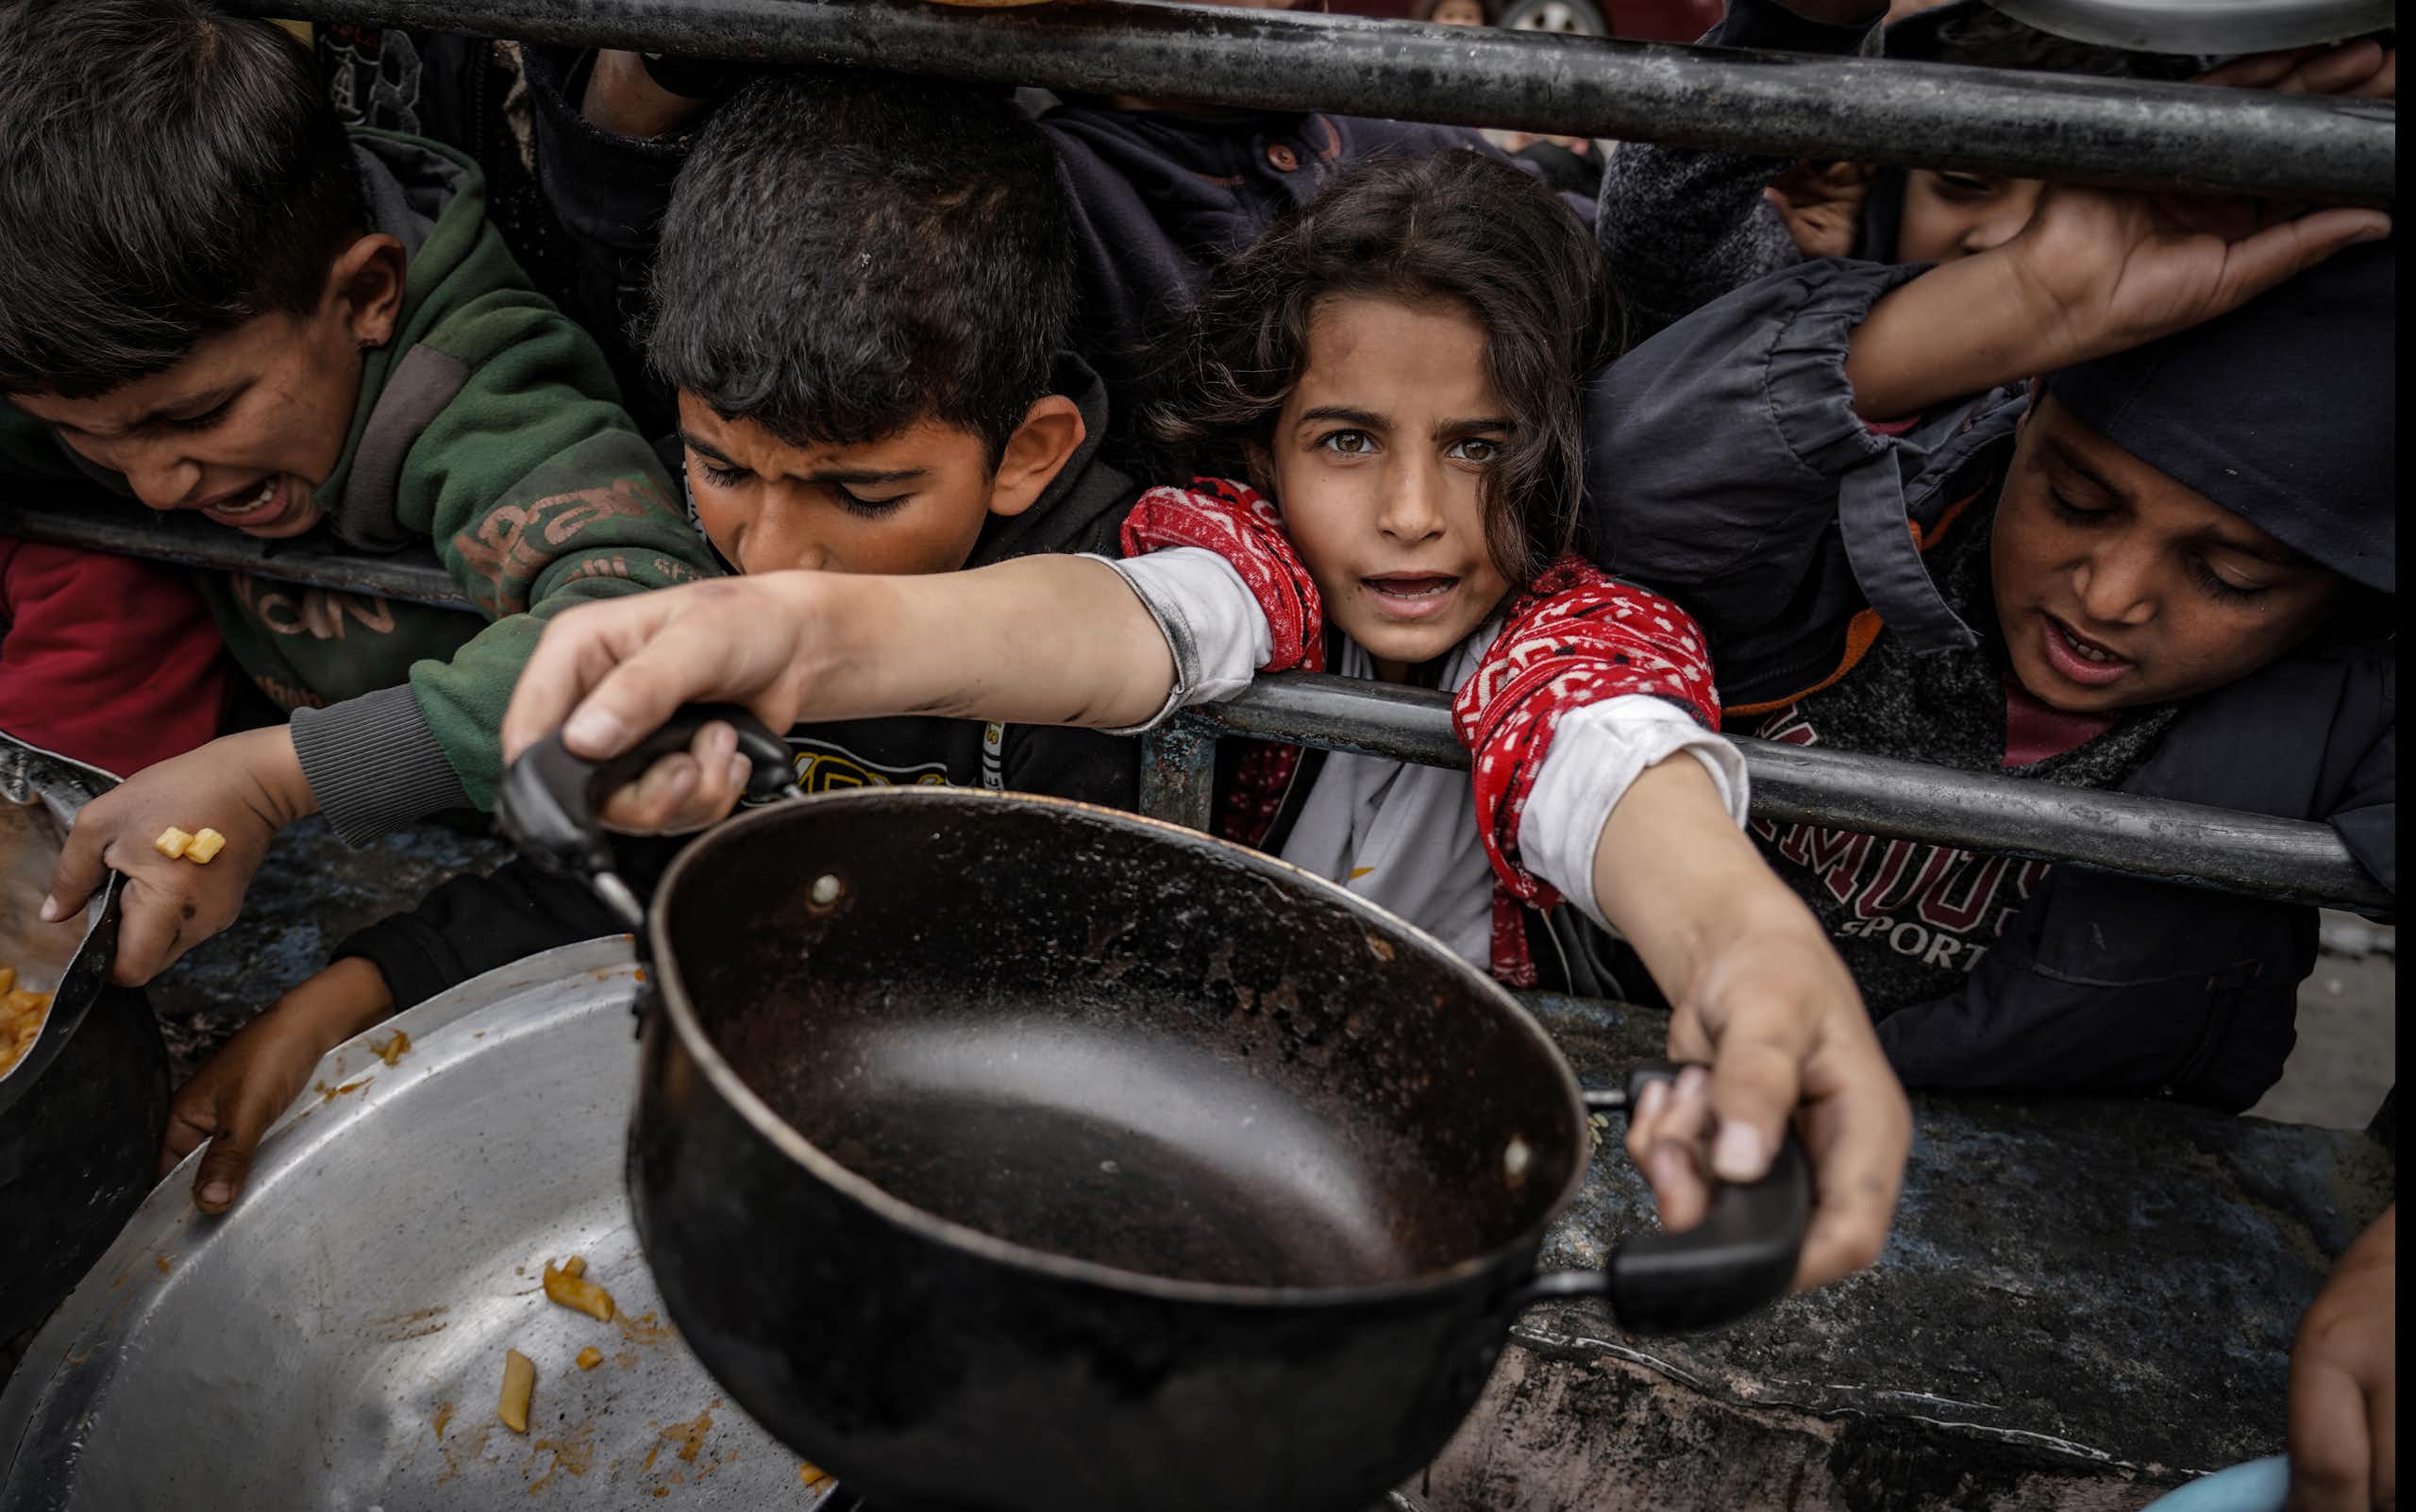 A girl holds out an empty pan while boys surround her.